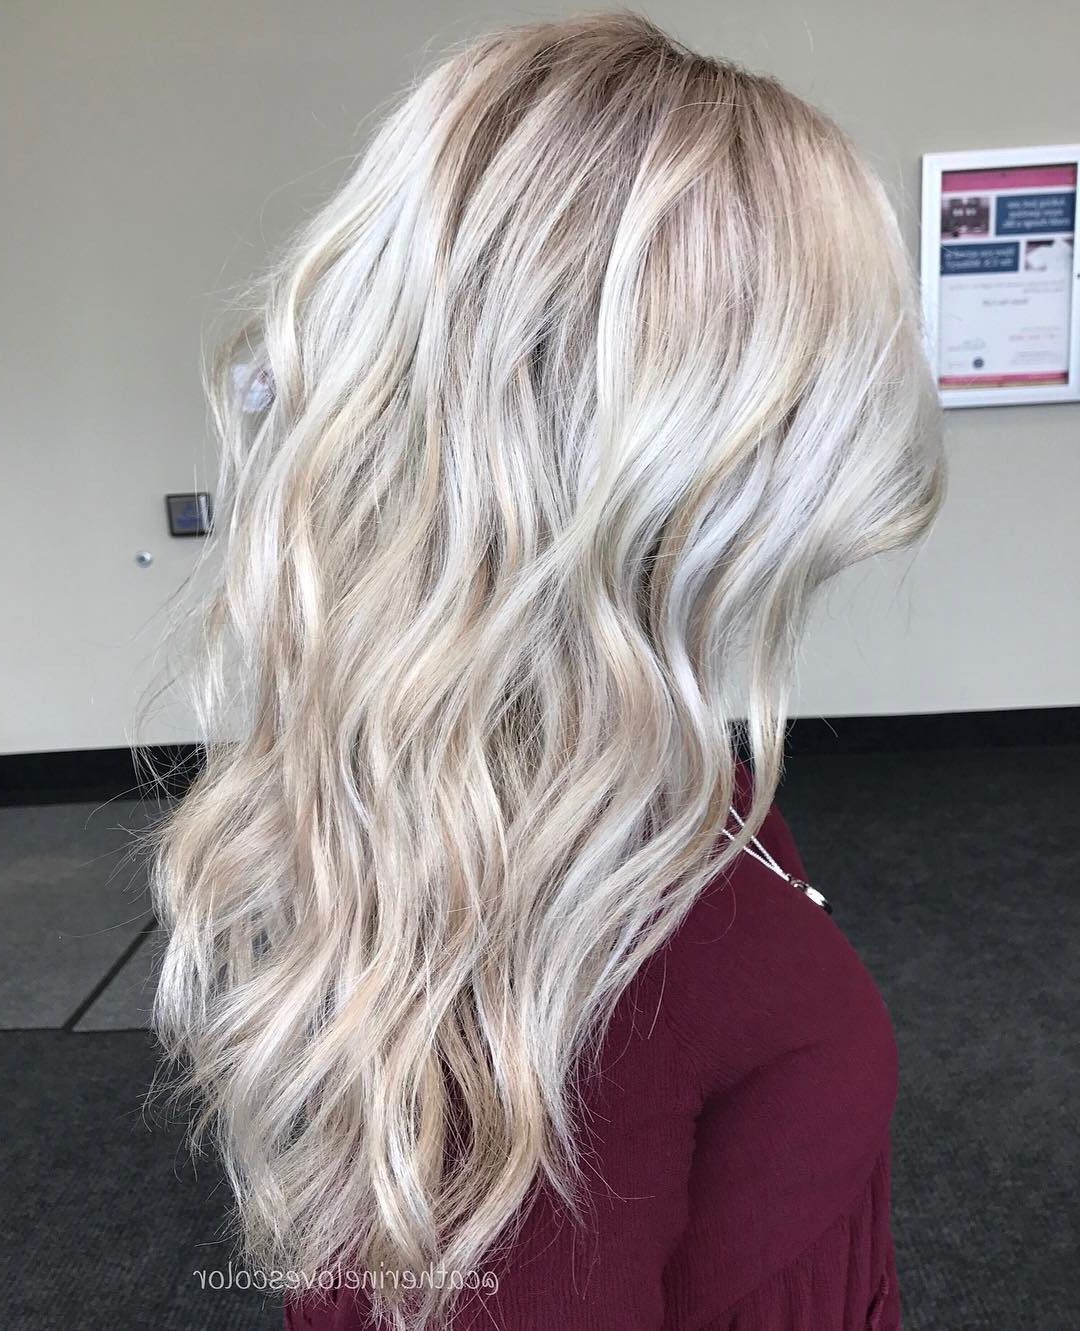 20 Adorable Ash Blonde Hairstyles To Try: Hair Color Ideas 2018 In White Blonde Curly Layered Bob Hairstyles (View 20 of 20)